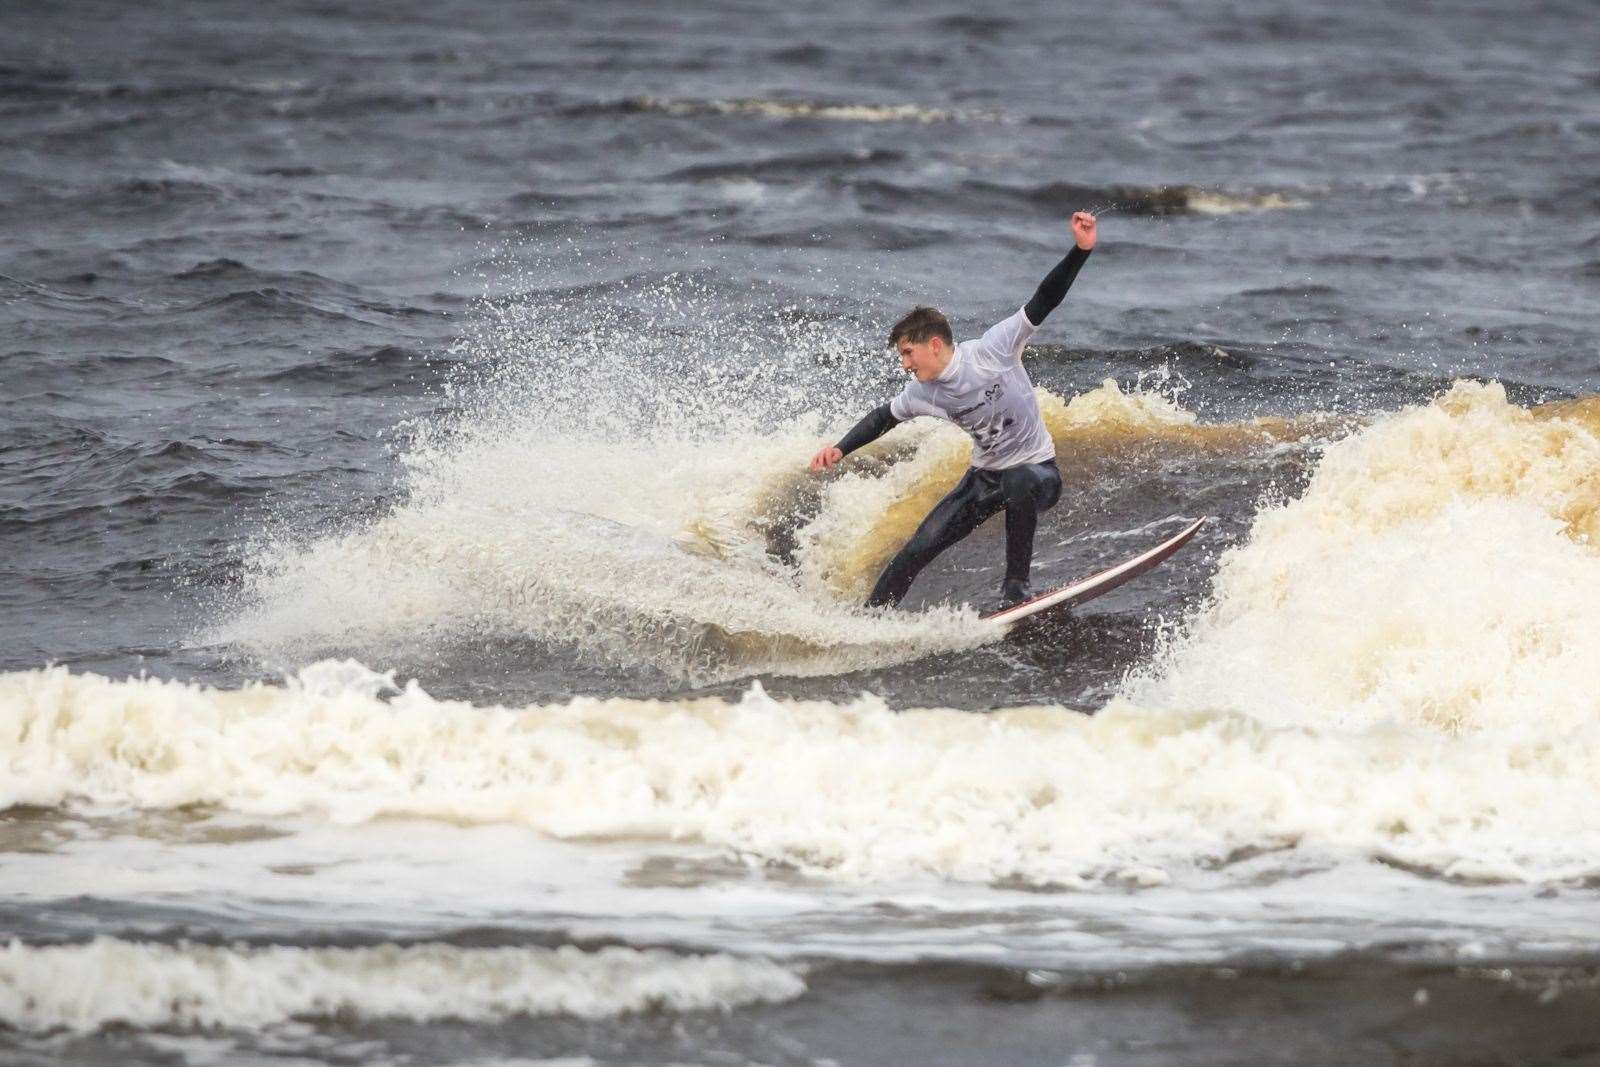 Craig McLachlan (16) won the open title at the Scottish National Surfing Championships held at Thurso East in November. Picture: Duncan McLachlan